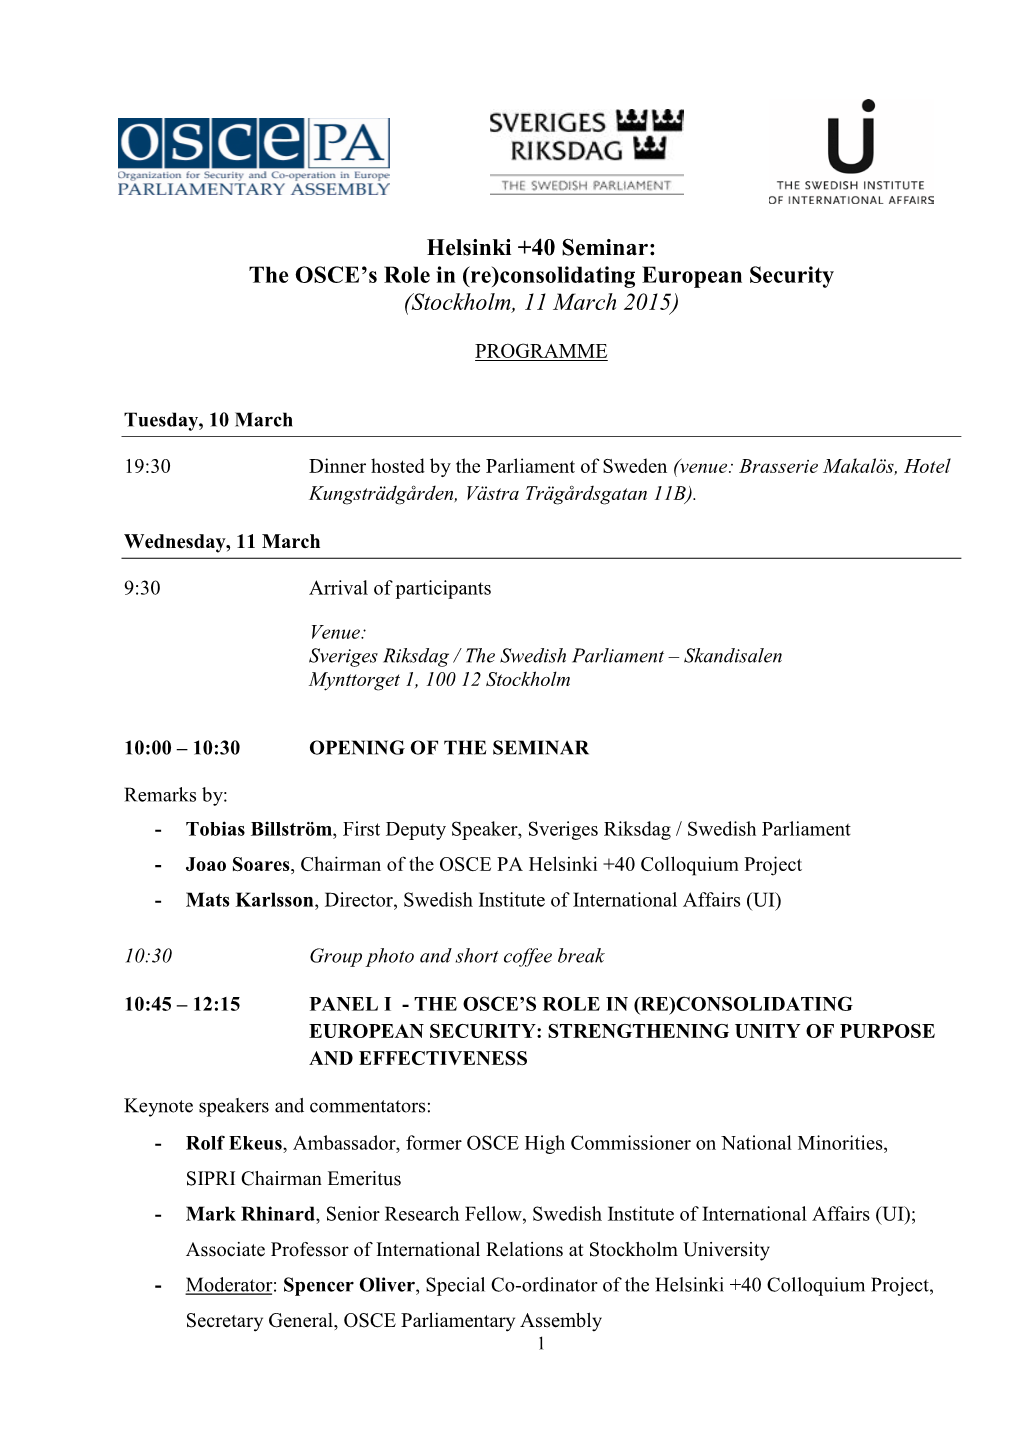 Helsinki +40 Seminar: the OSCE’S Role in (Re)Consolidating European Security (Stockholm, 11 March 2015)